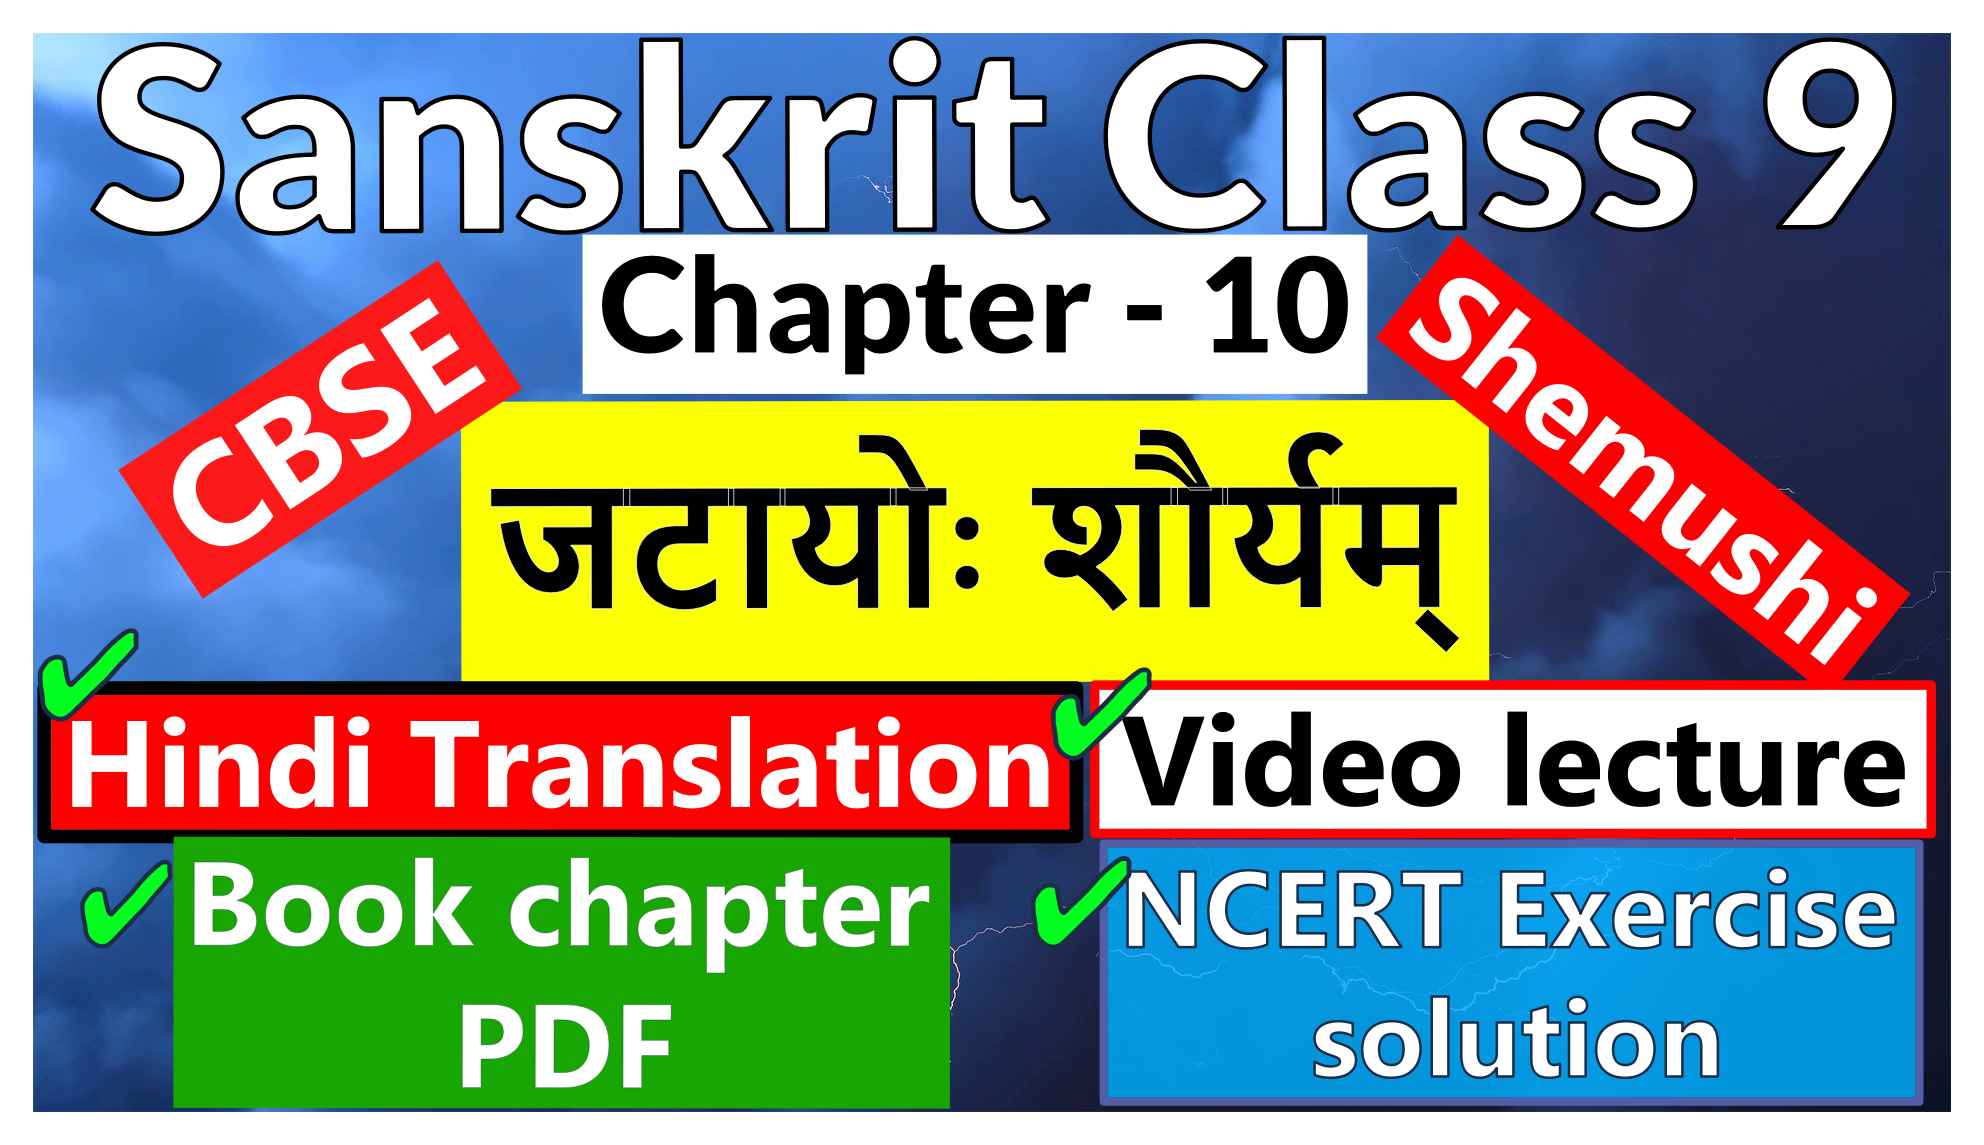 Sanskrit Class 9 -Chapter 10 - जटायोः शौर्यम् - Hindi Translation, Video lecture, NCERT Exercise solution (Question-Answer), Book chapter PDF